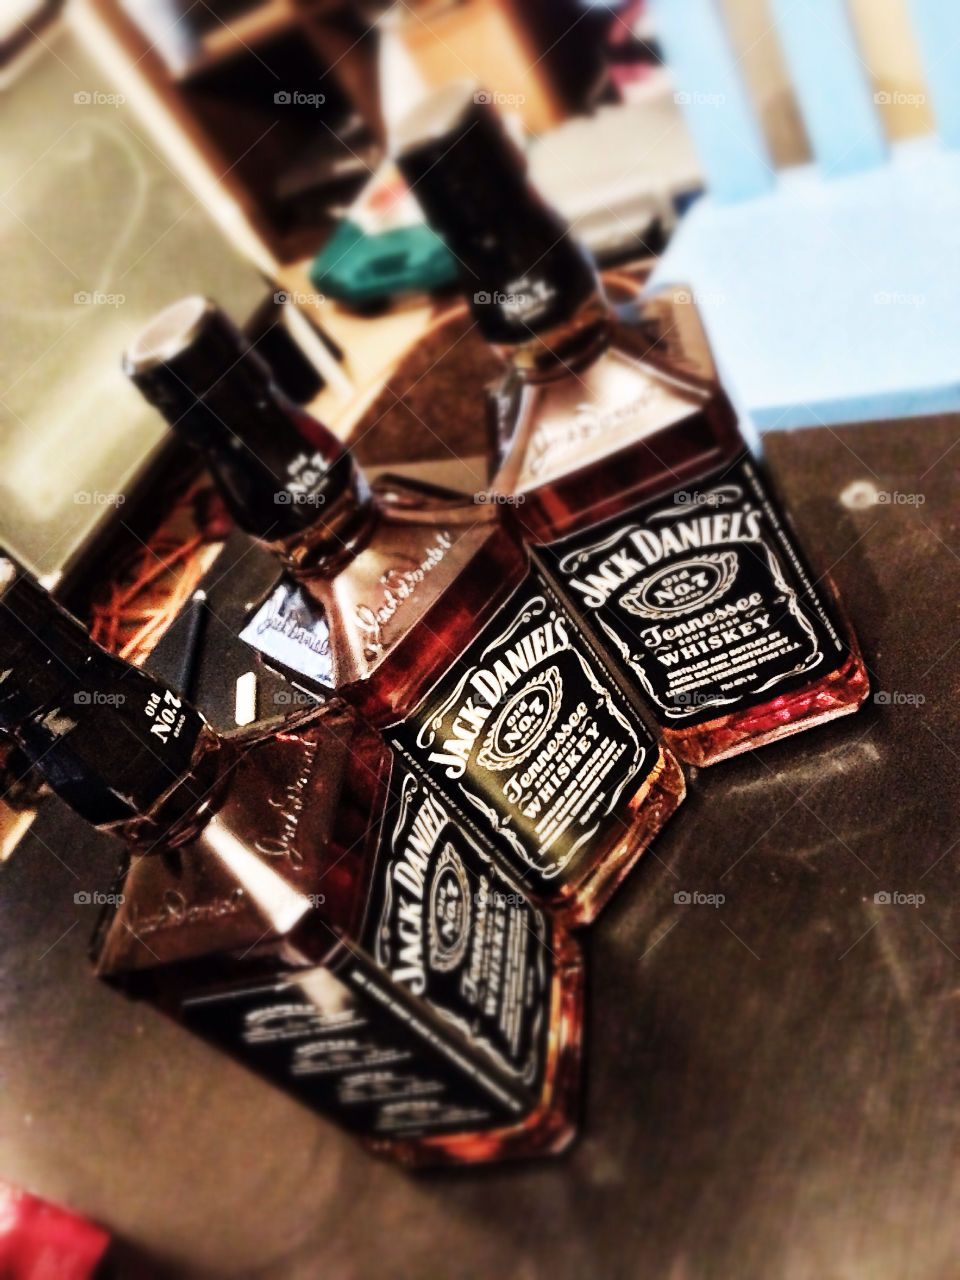 Too many bottles of Jack for Christmas!